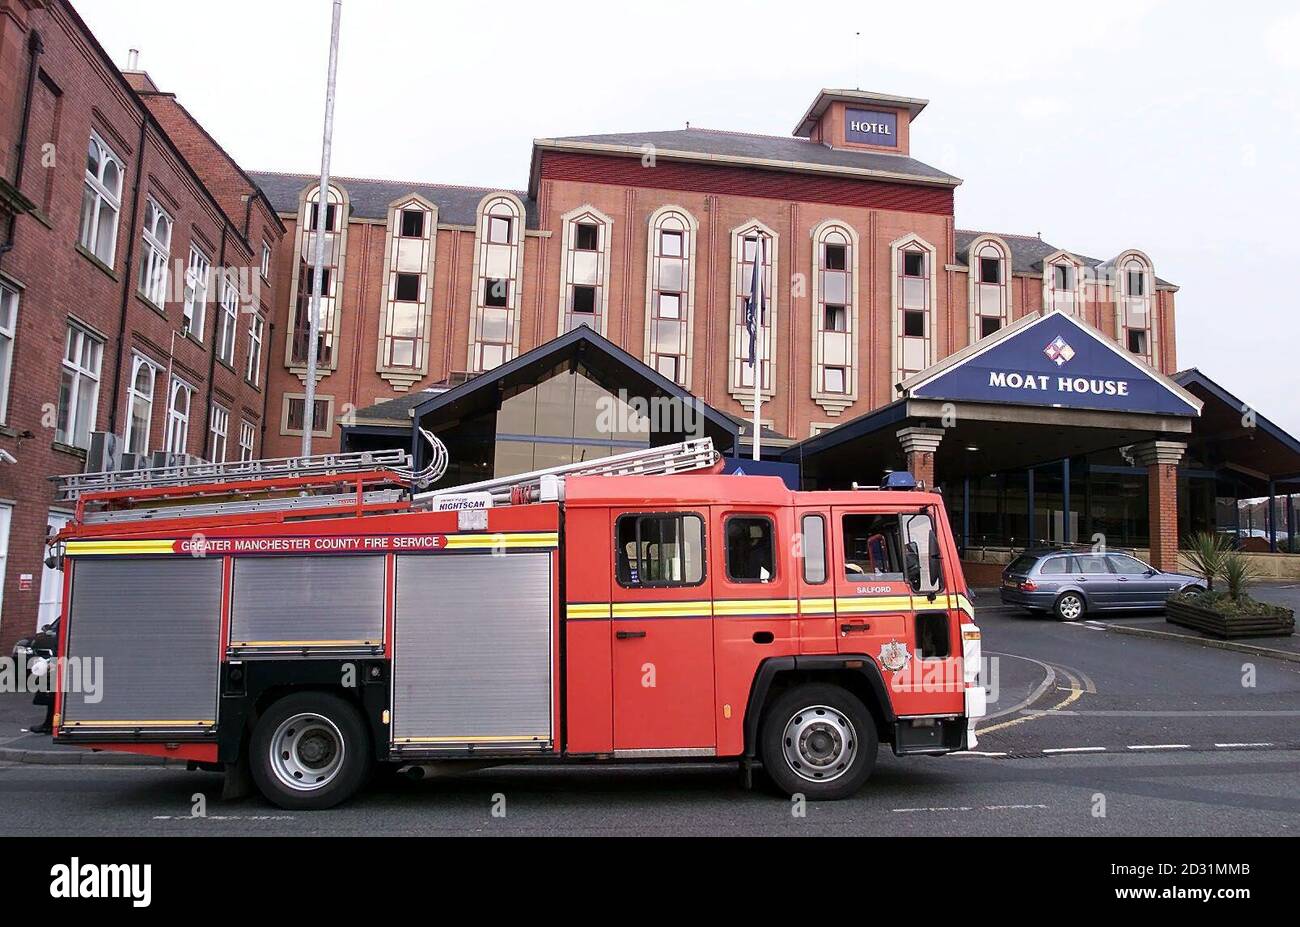 A fire engine stands outside the Bolton Moathouse, where two people died in a severe blaze in the early hours of the morning. Greater Manchester Fire Service were called to the fire and hotel staff evacuated most of the 128 guests as the blaze took hold on the third floor.  * a fire service spokesman said. Firefighters wearing breathing apparatus searched the hotel and a man and a woman were found in a corridor on the third floor and were later pronounced dead at Bolton Royal Hospital, the spokesman added.  Stock Photo